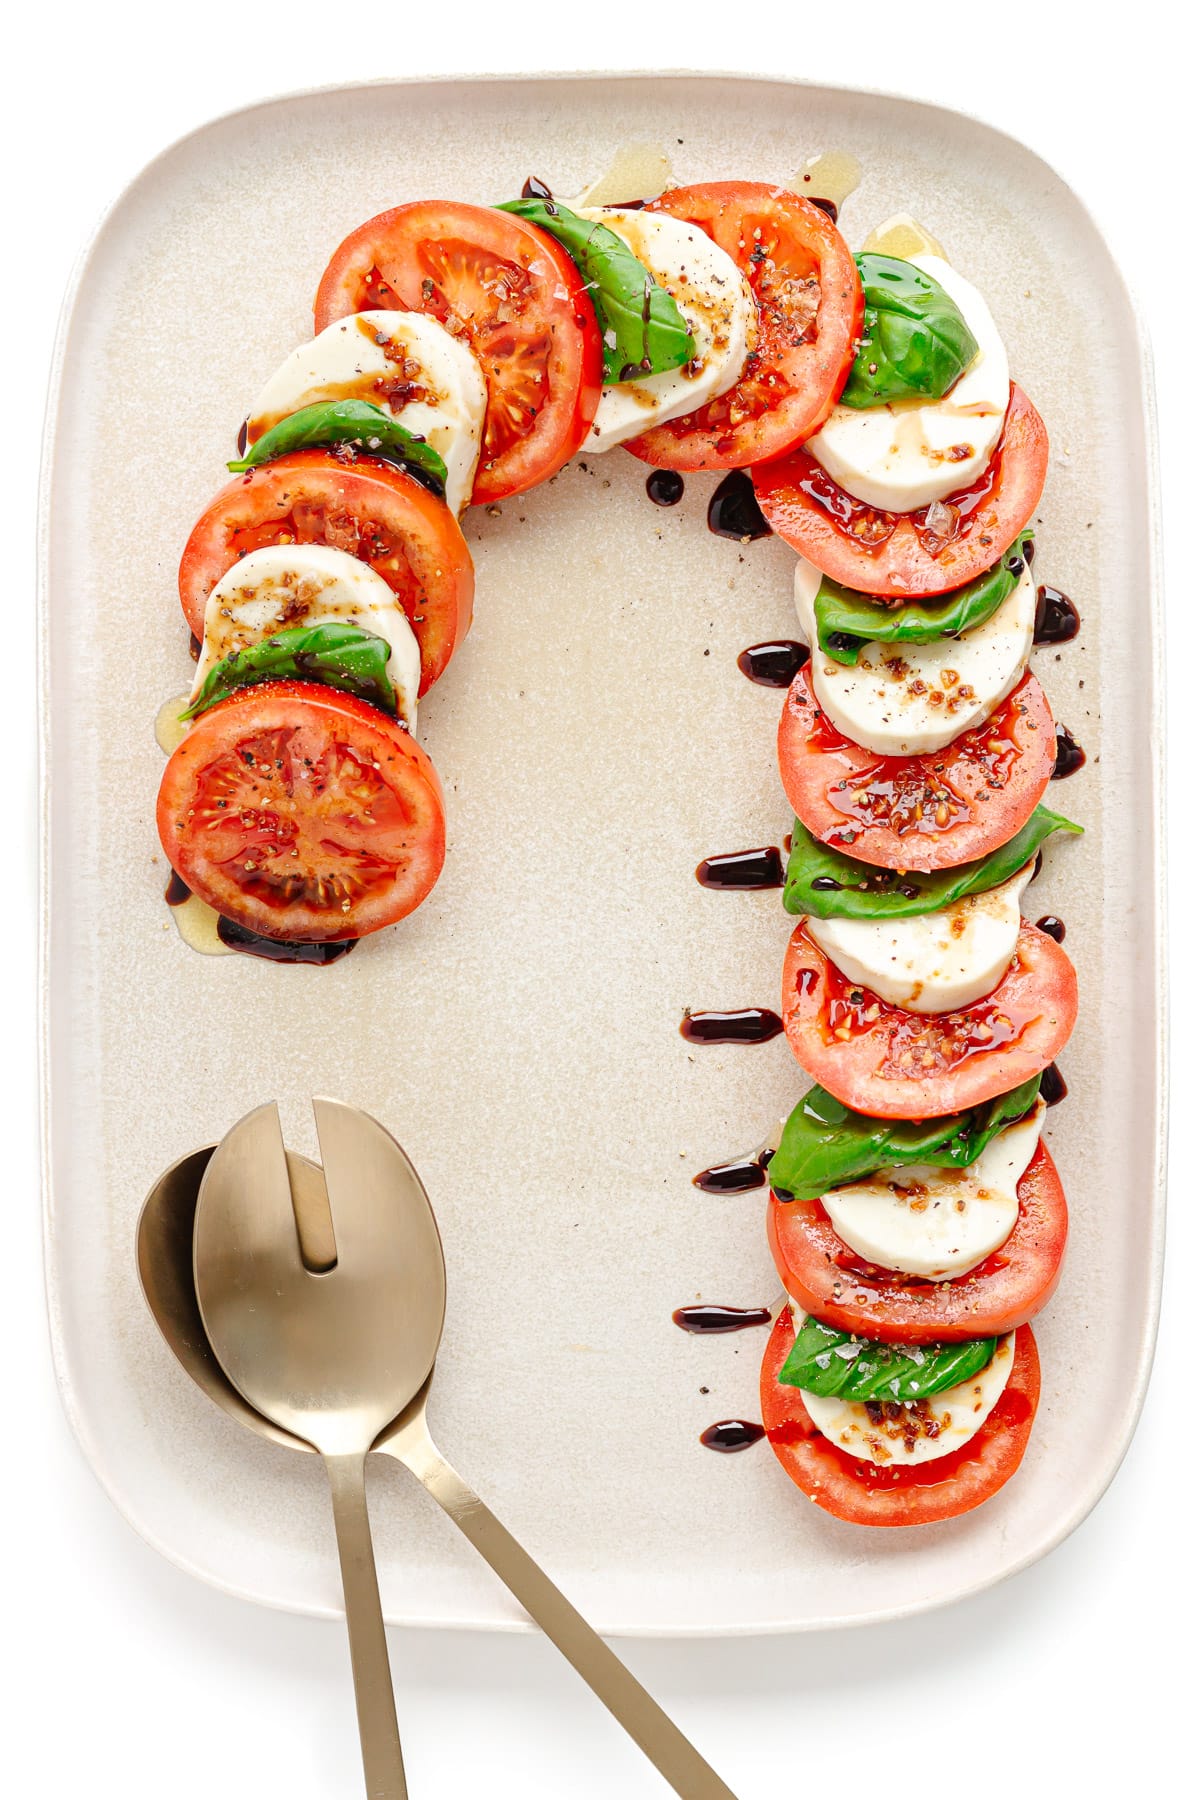 Caprese salad arranged in the shape of a candy cane on a cream colored platter with salad servers.